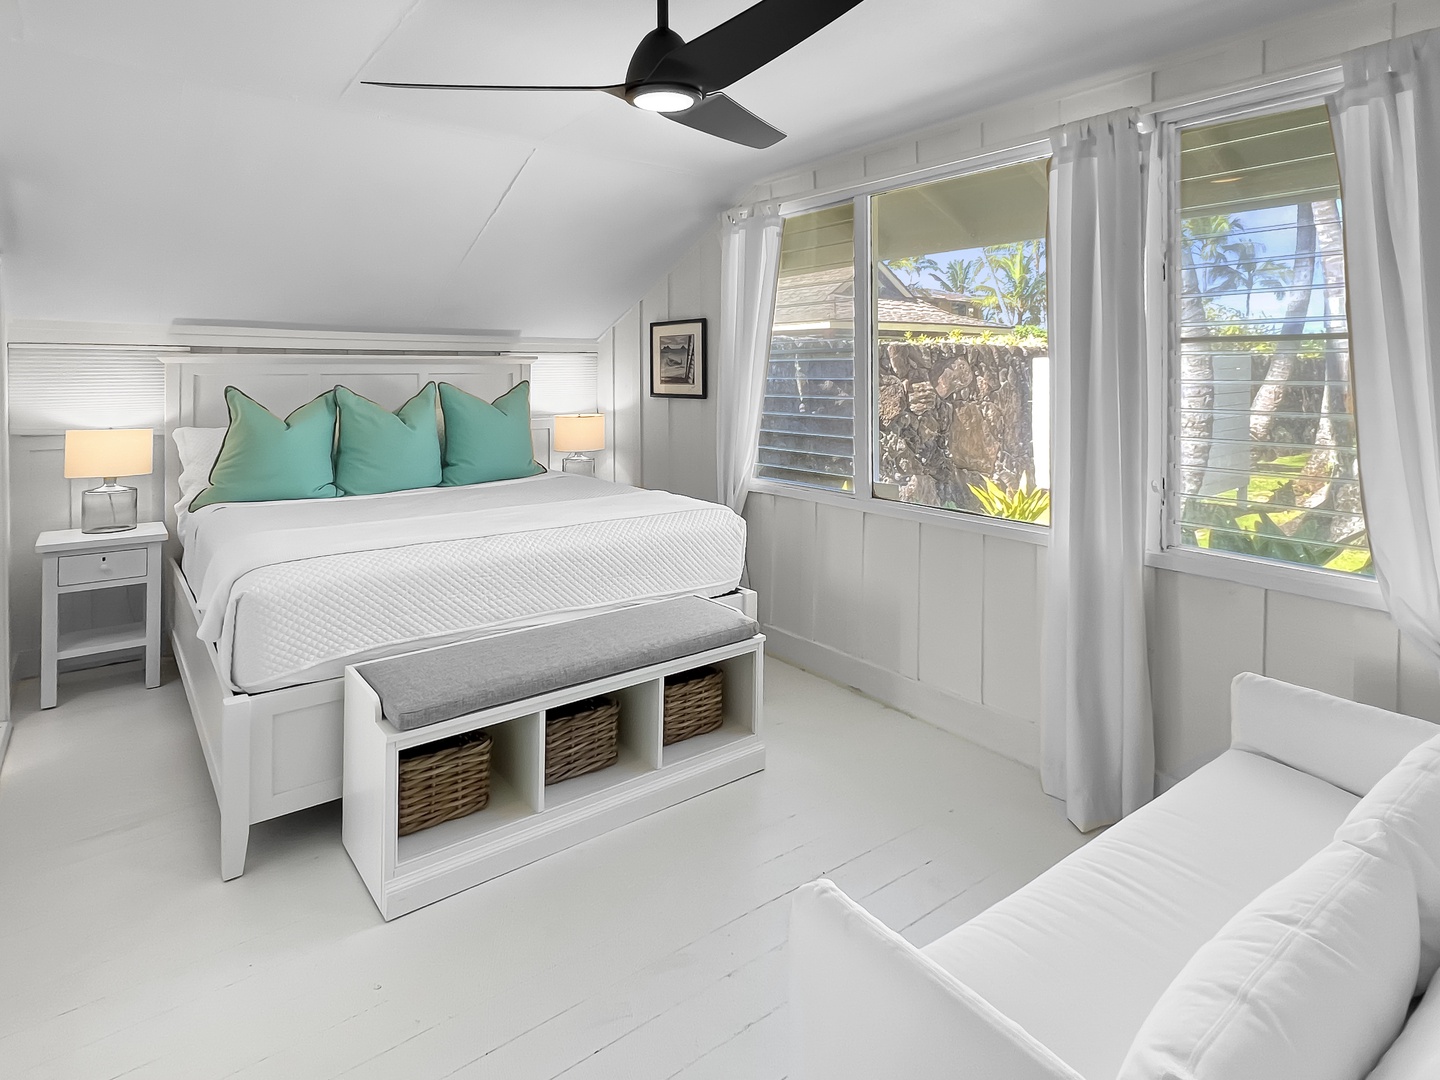 Kailua Vacation Rentals, Kai Mele - The Primary Bedroom has ocean and garden views and brand new furniture!